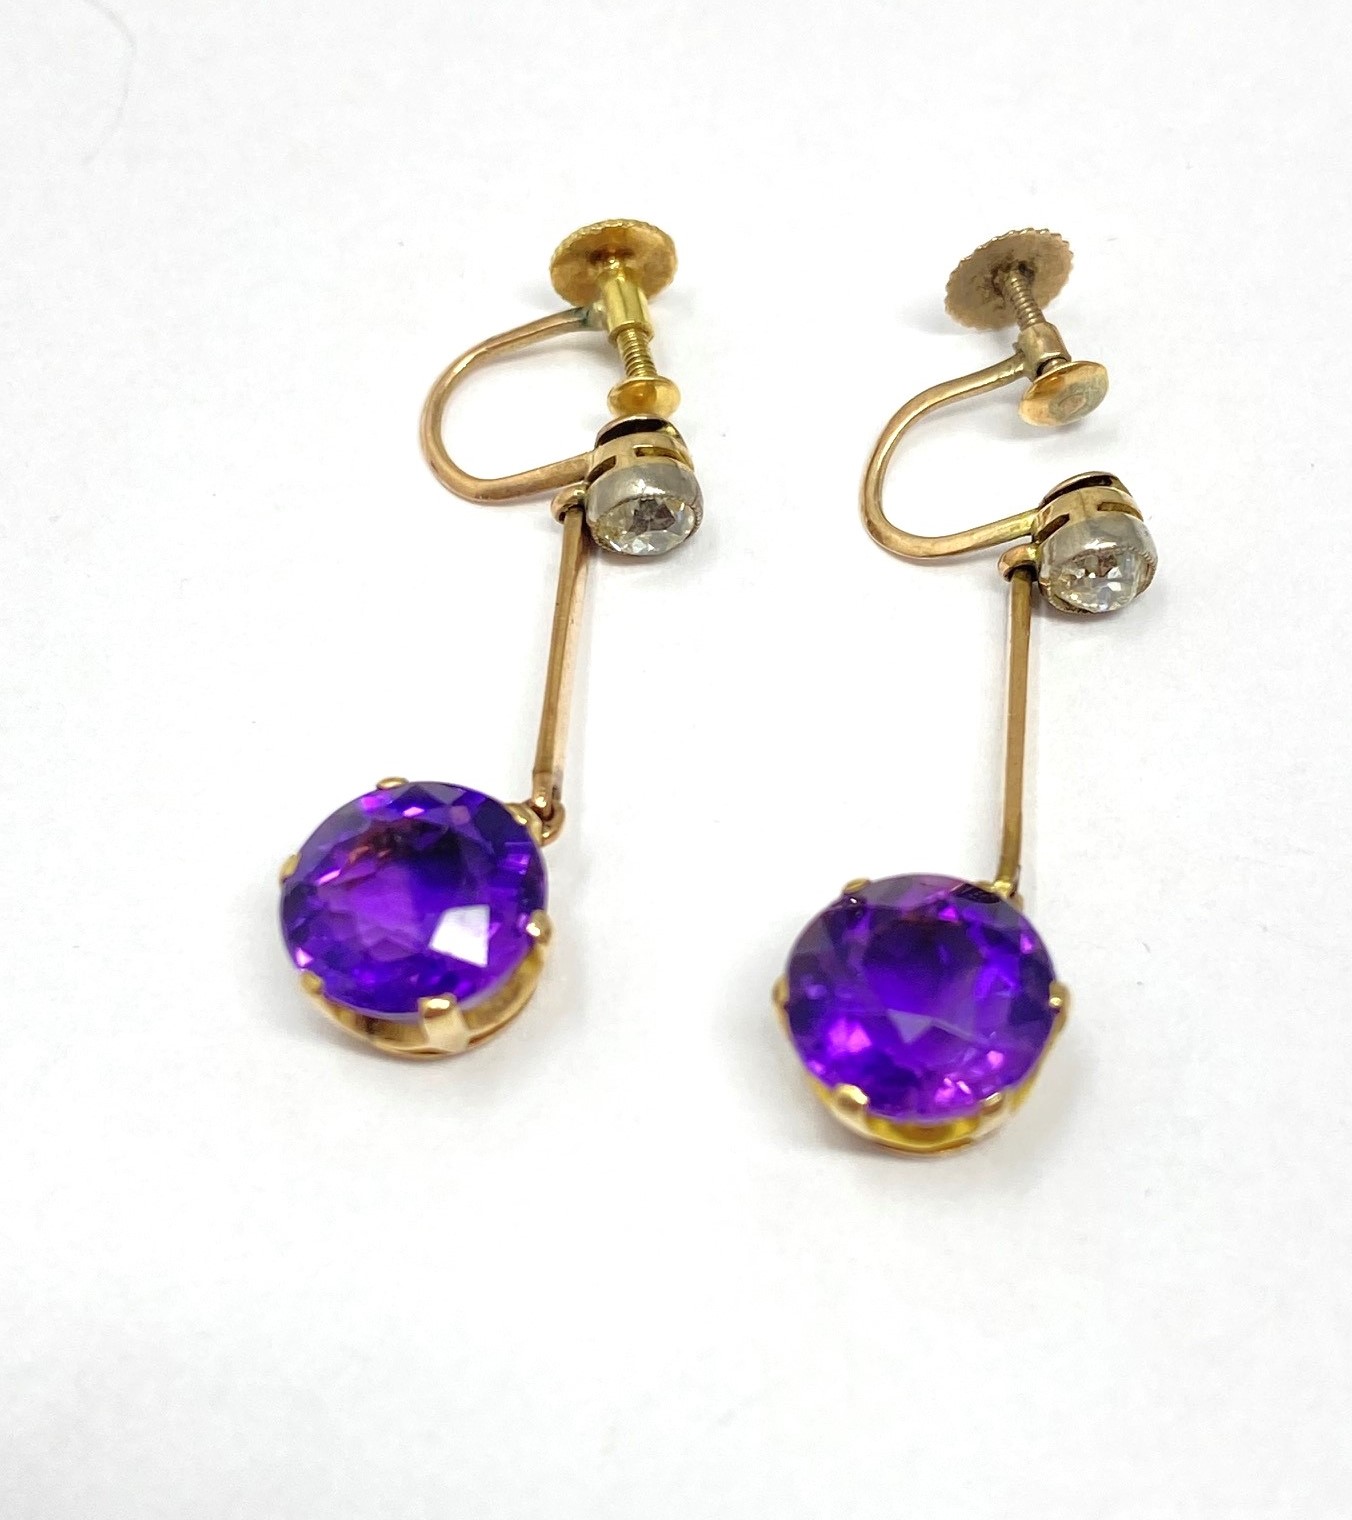 TWO PAIRS OF GOLD, AMETHYST AND DIAMOND PENDENT EARRINGS, 1900s - Image 2 of 2